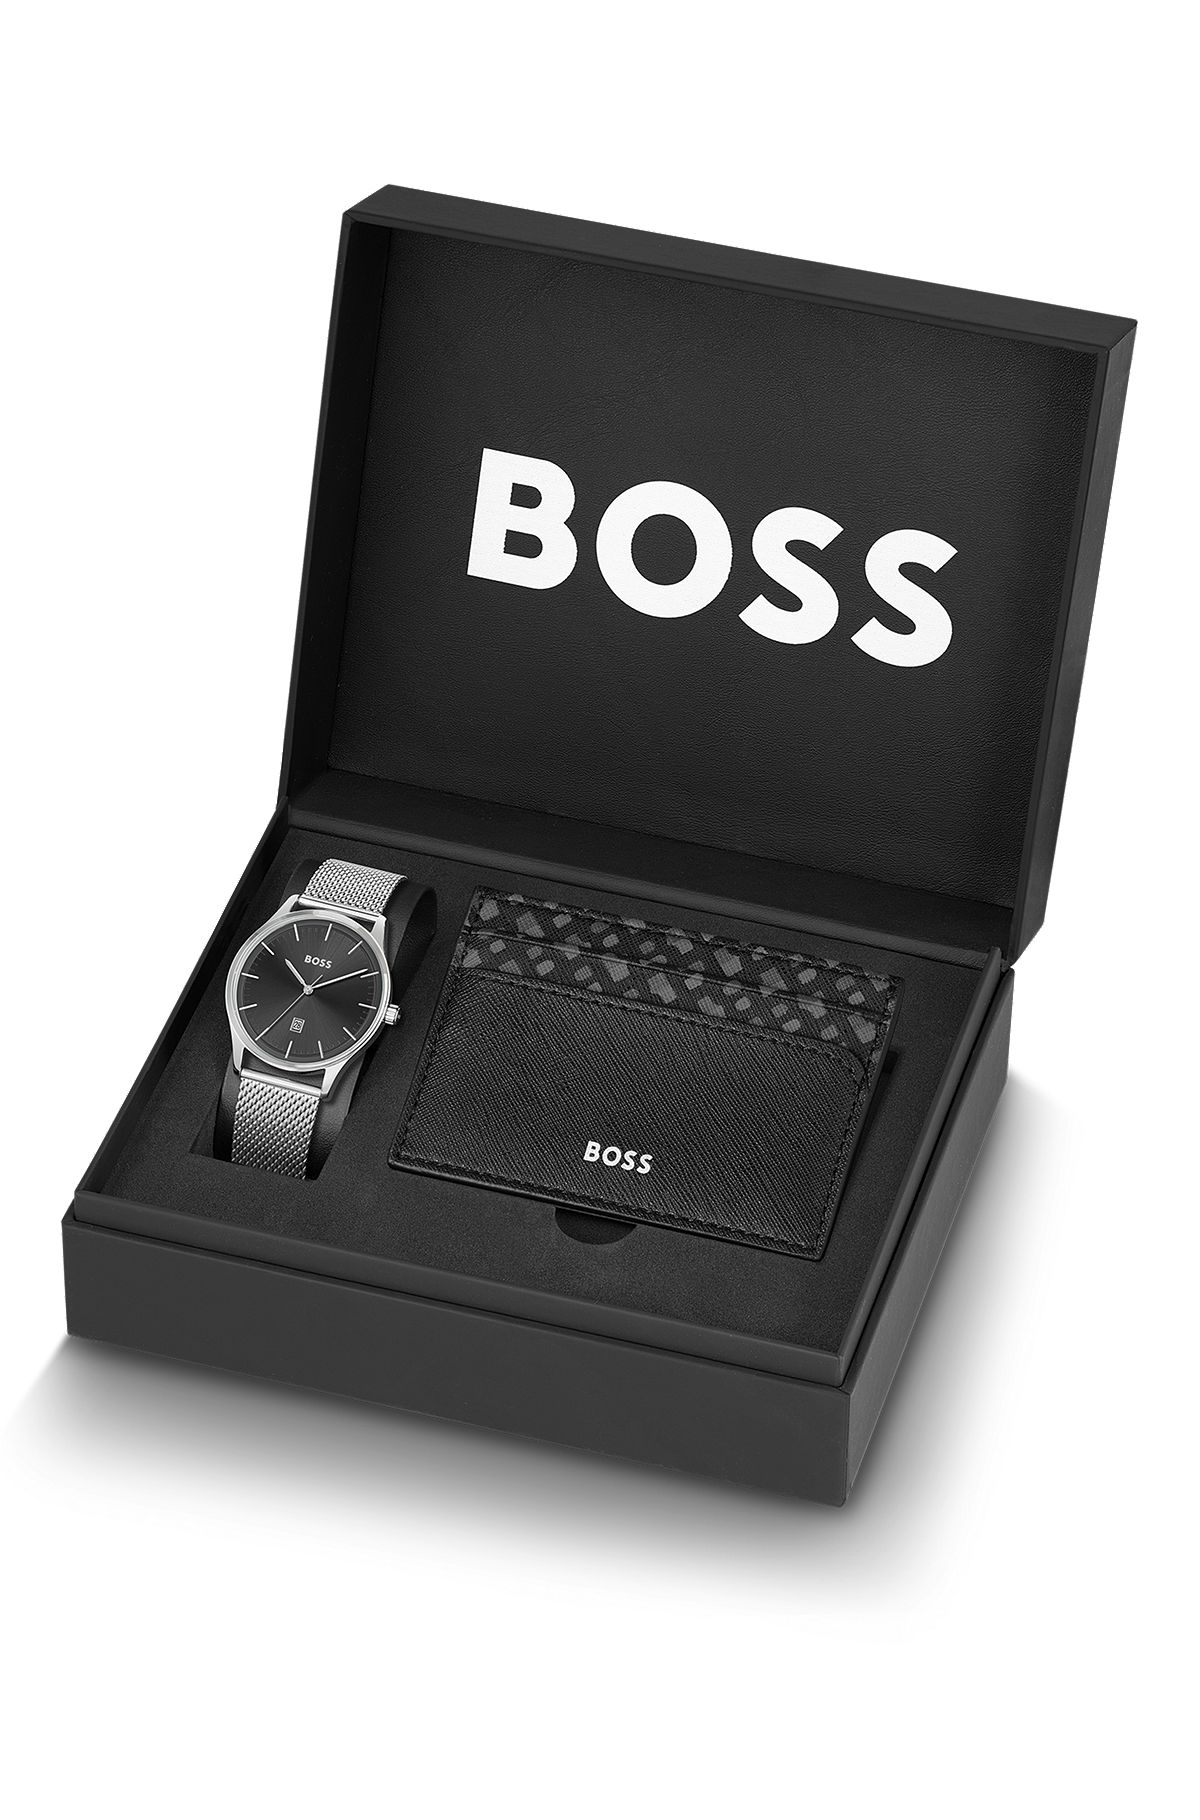 Gift-boxed watch and card holder with logo details, Silver